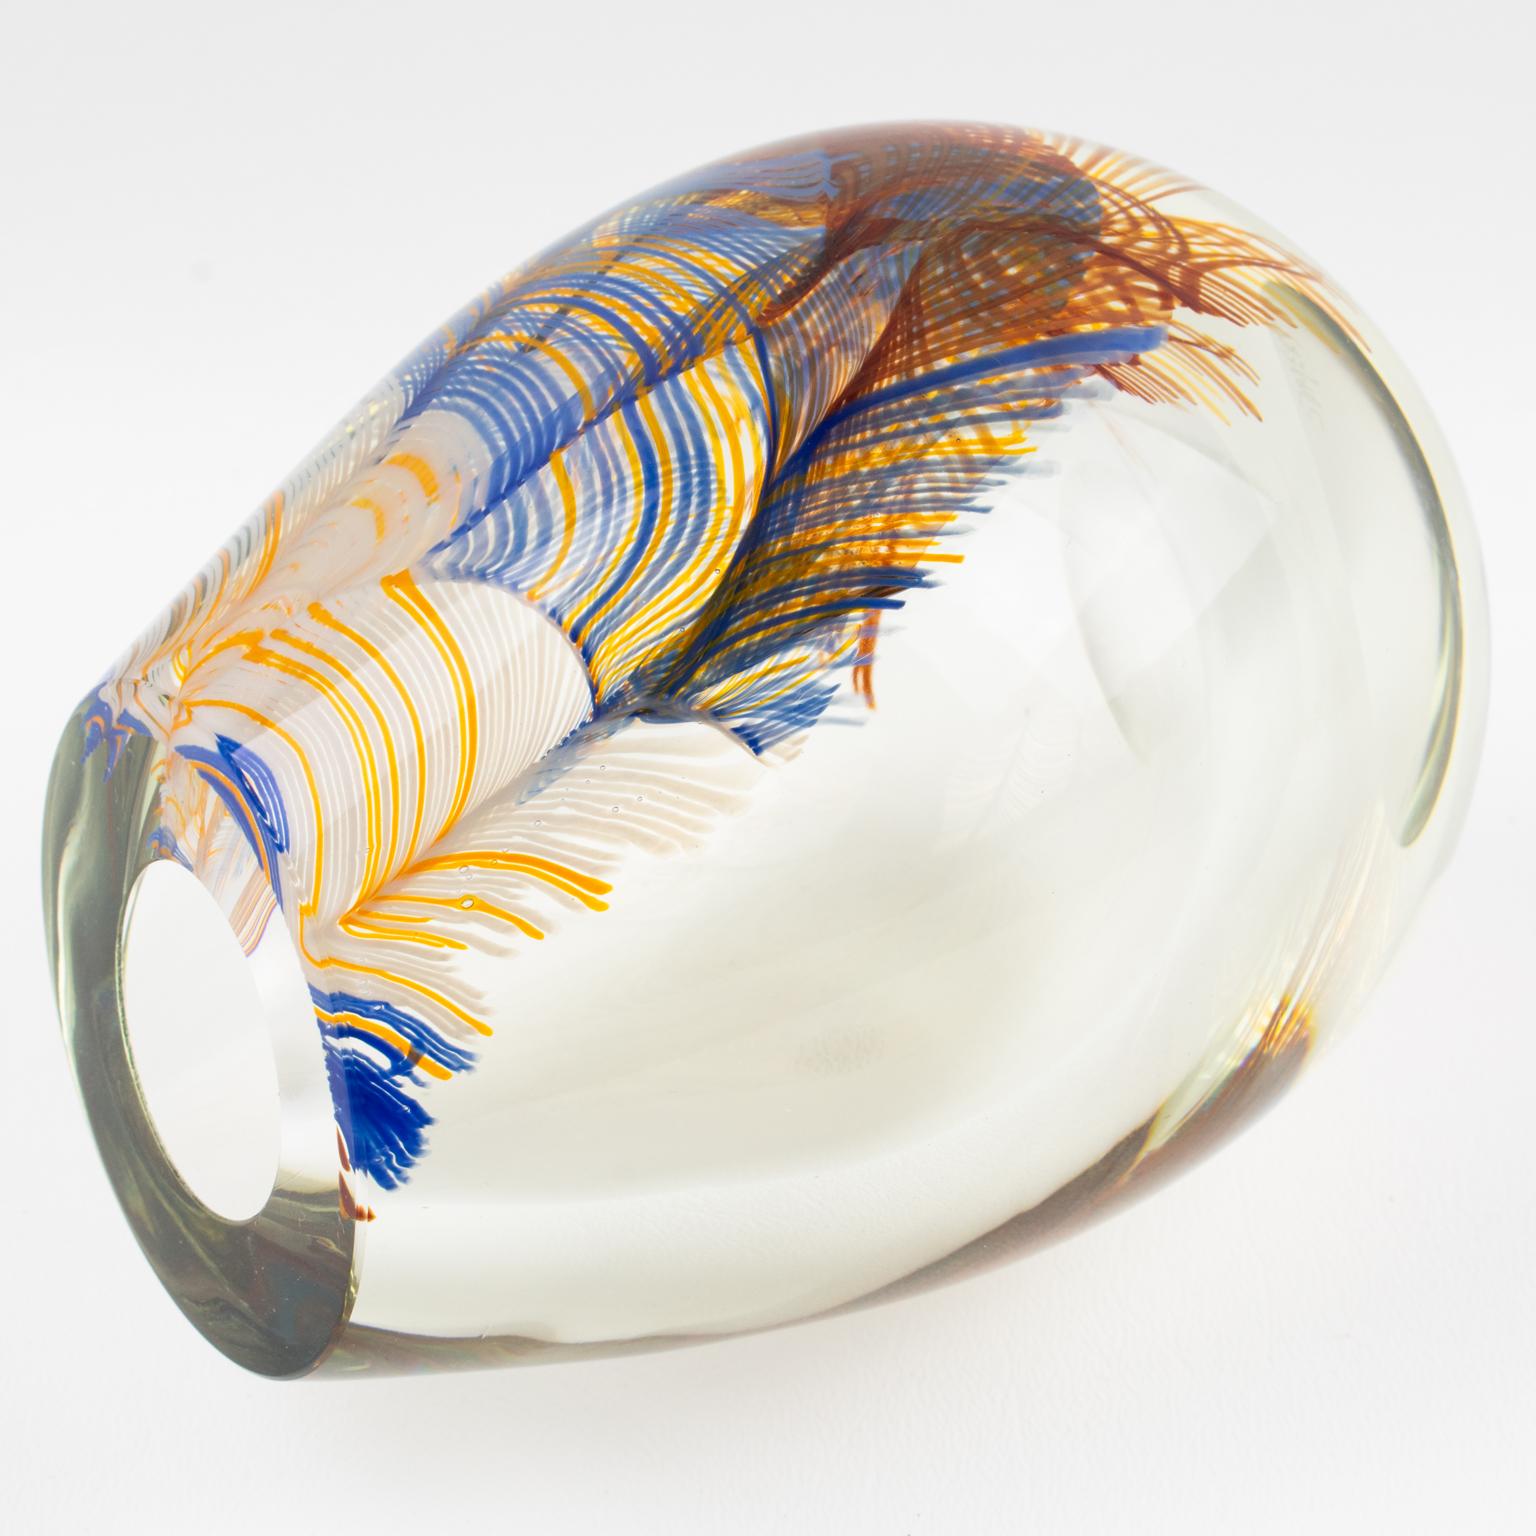 Stephen Smyers Modern Blown Art Glass Vase Abstract Feather Design, 1979 For Sale 3